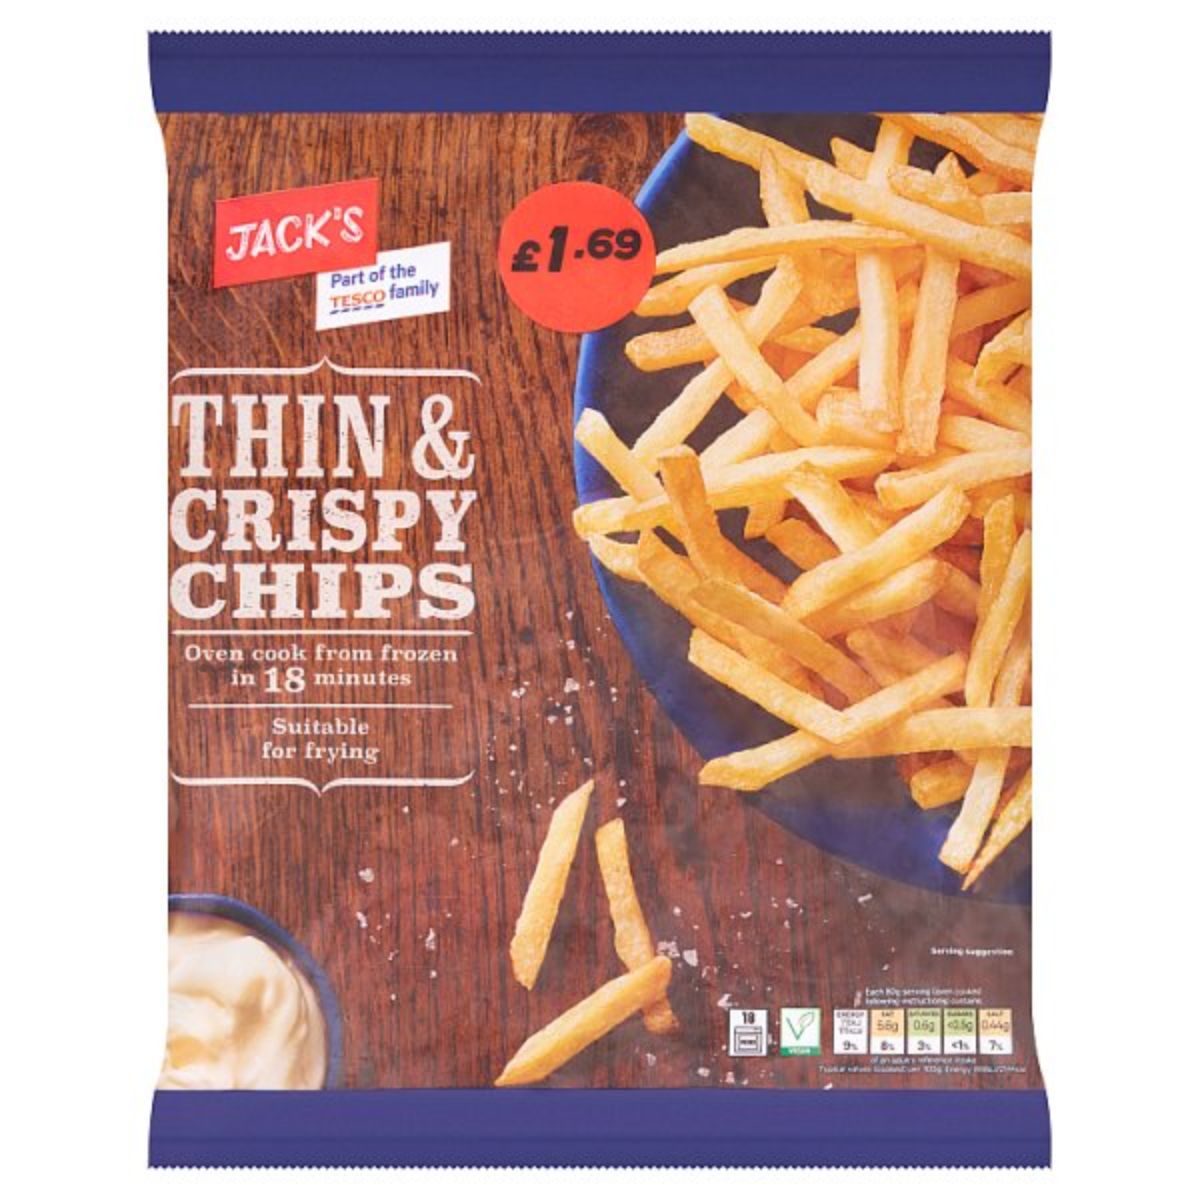 A bag of Jacks - Thin & Crispy Chips - 750g on a table.